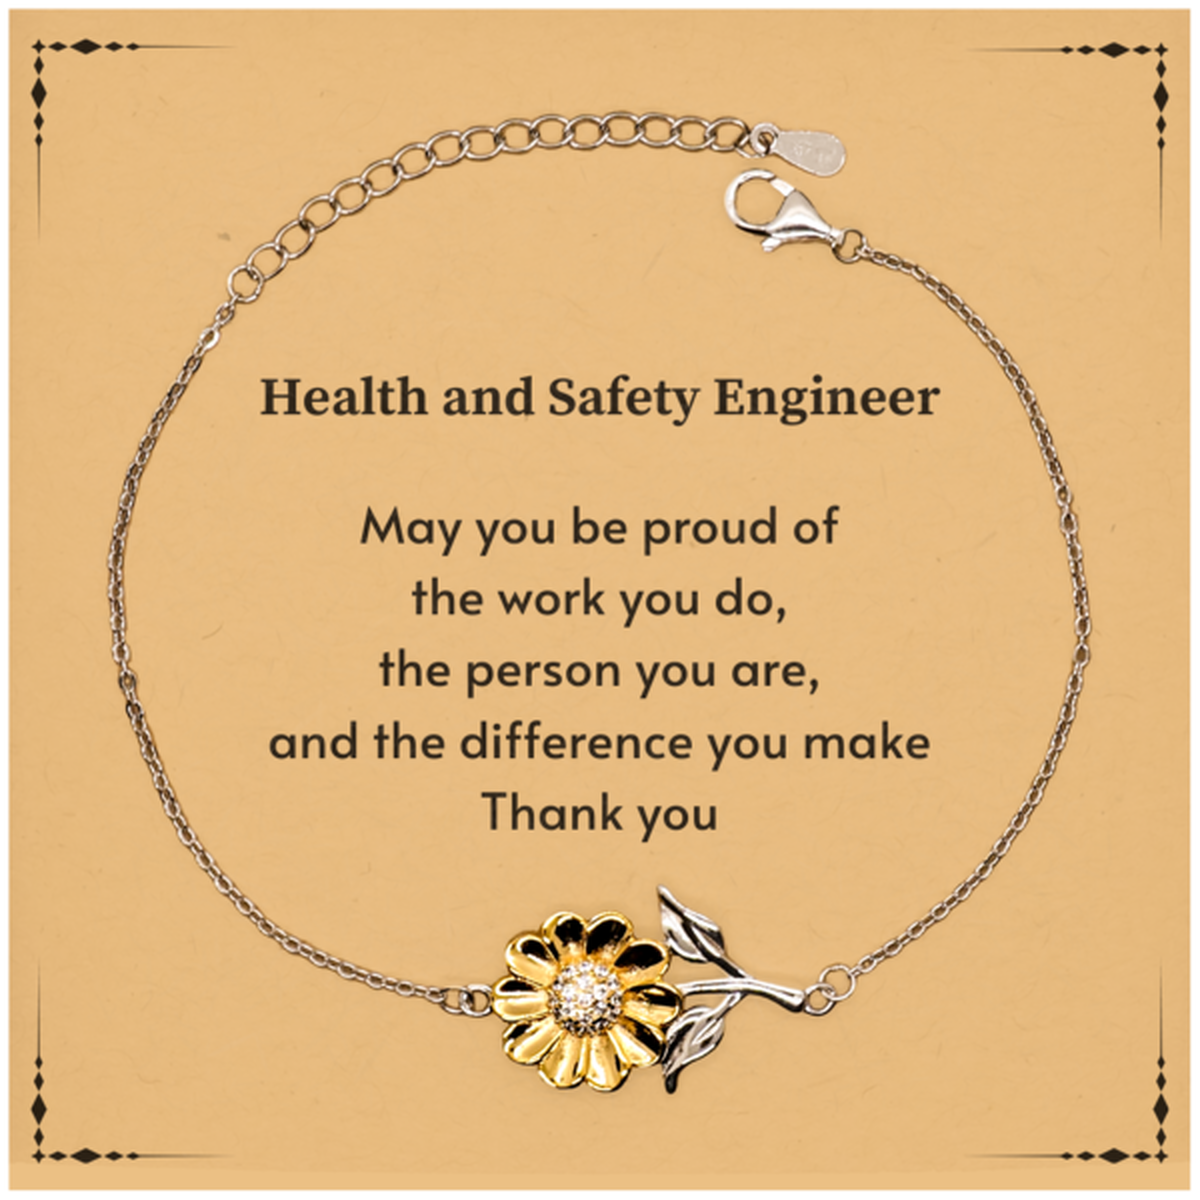 Heartwarming Sunflower Bracelet Retirement Coworkers Gifts for Health and Safety Engineer, Health and Safety Engineer May You be proud of the work you do, the person you are Gifts for Boss Men Women Friends